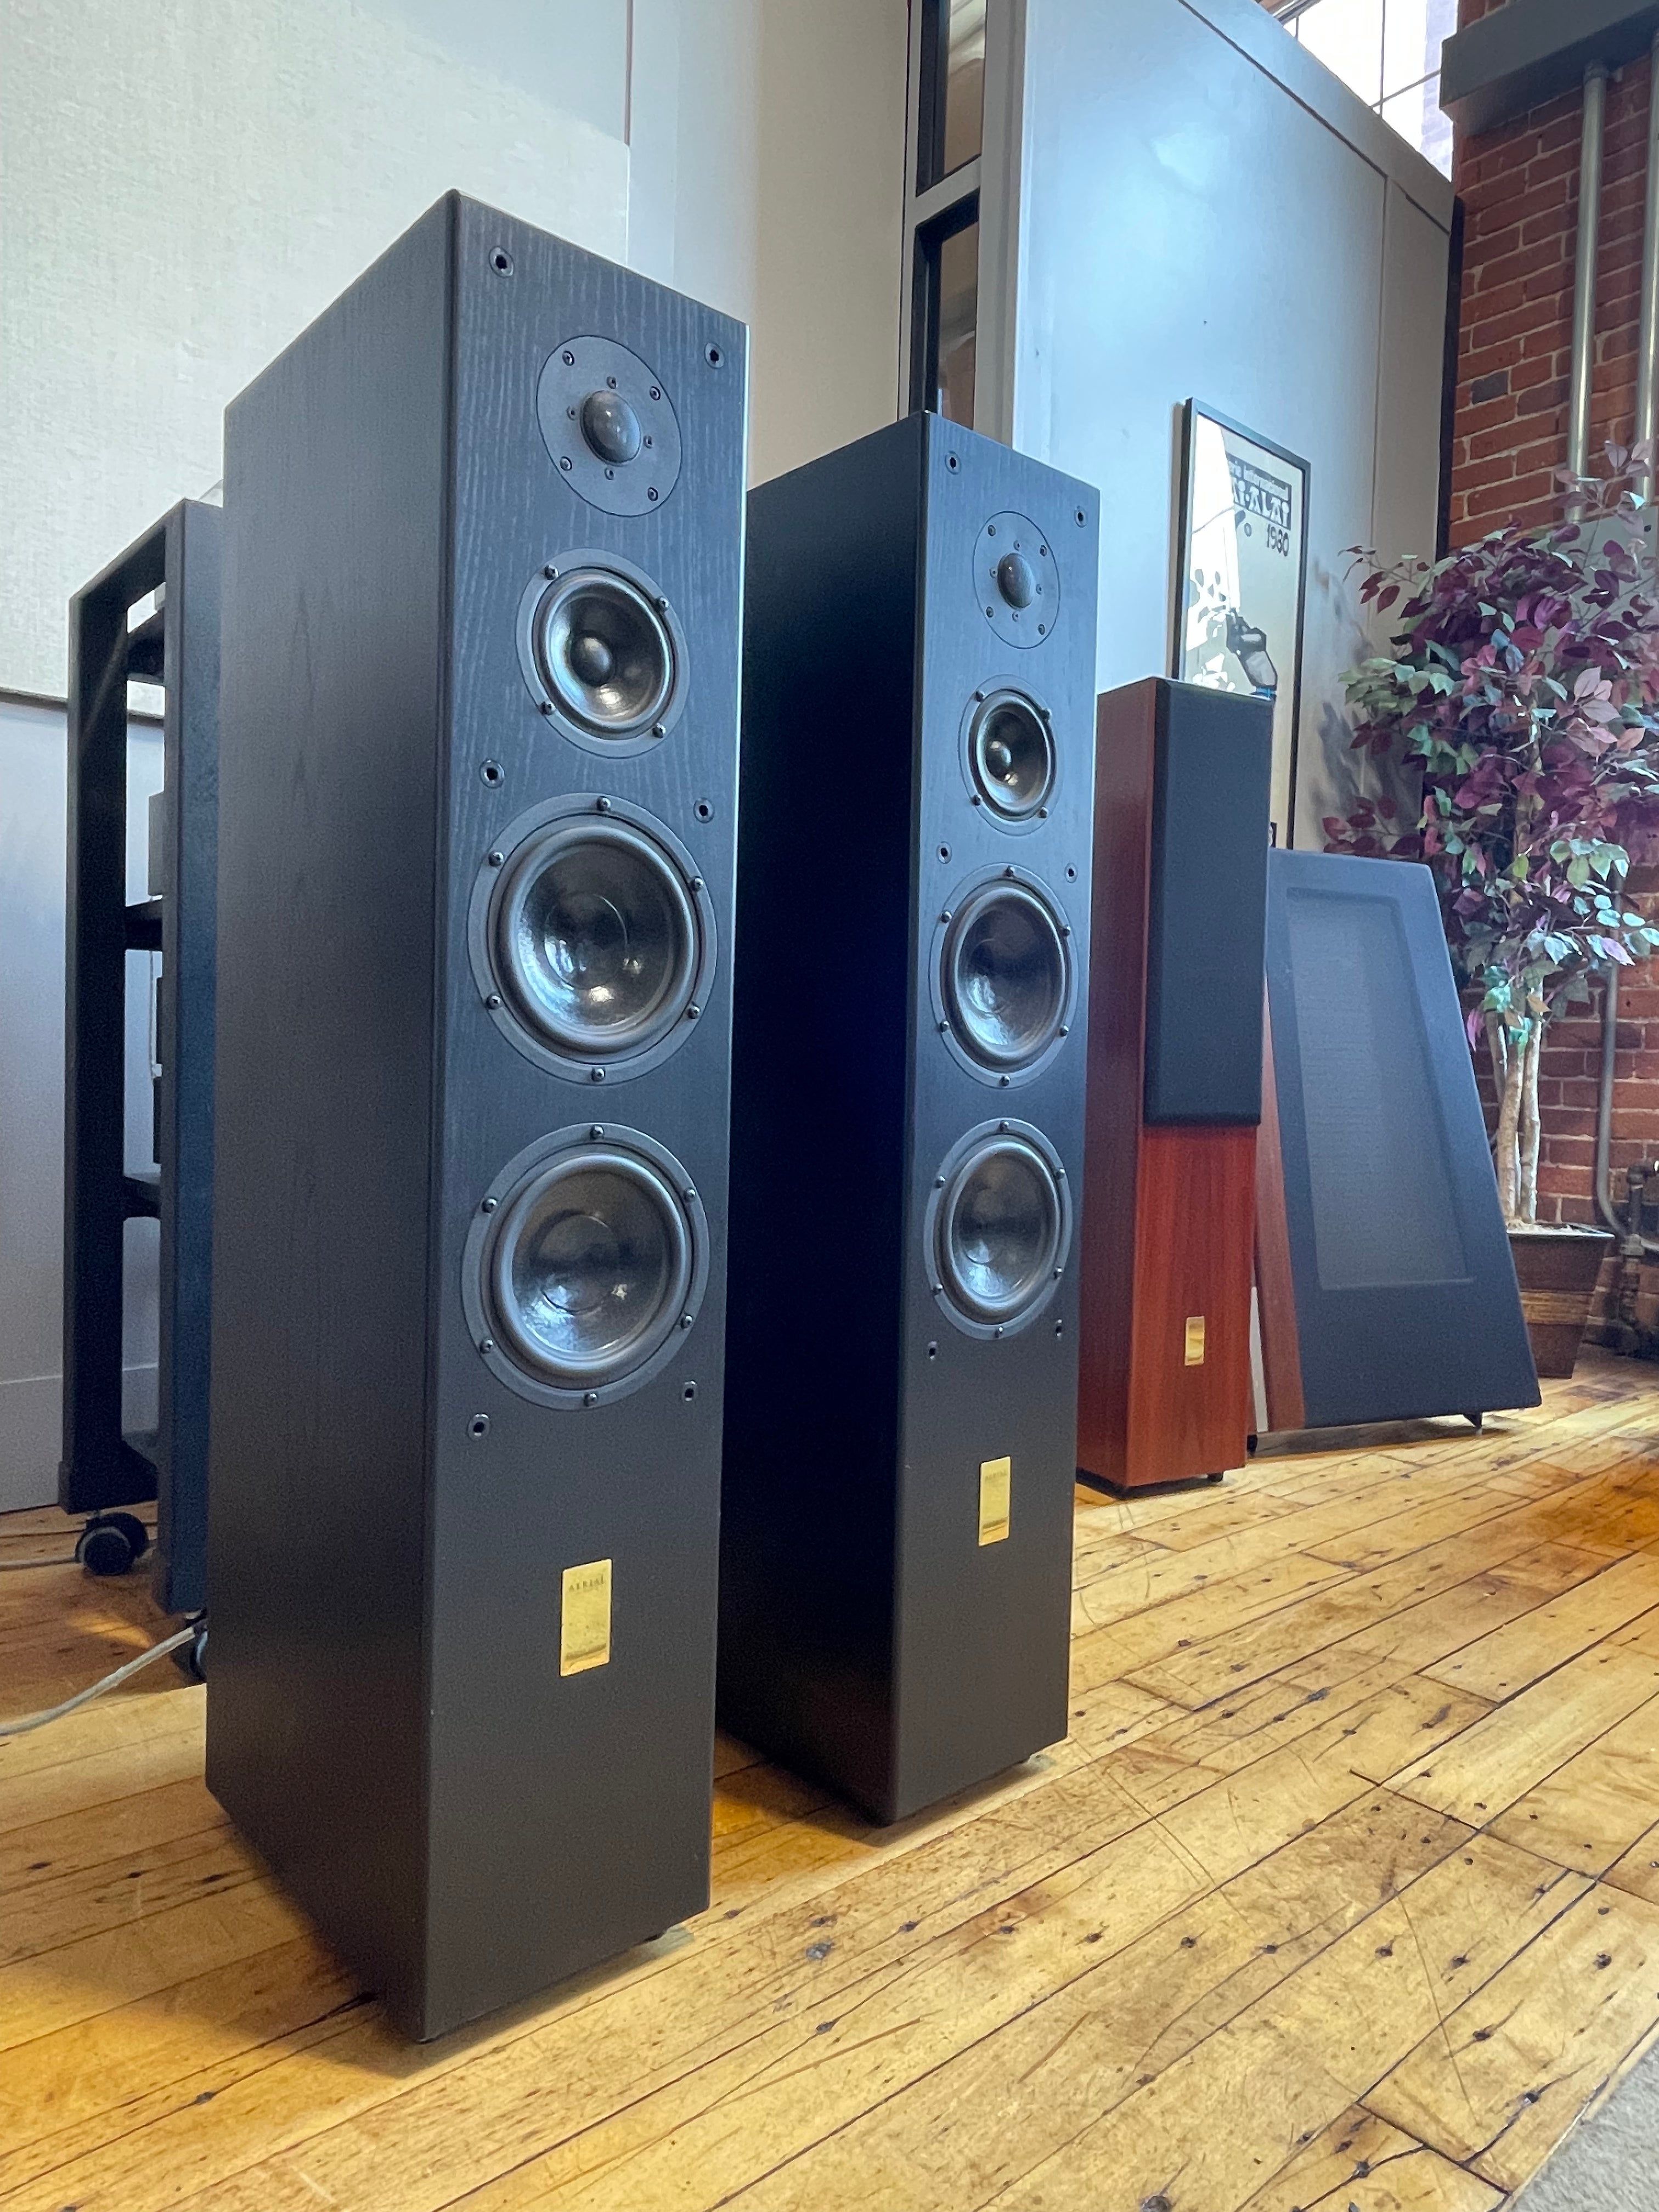 Aerial Acoustics 7B - "Magnificent Full Range Towers" - SOLD